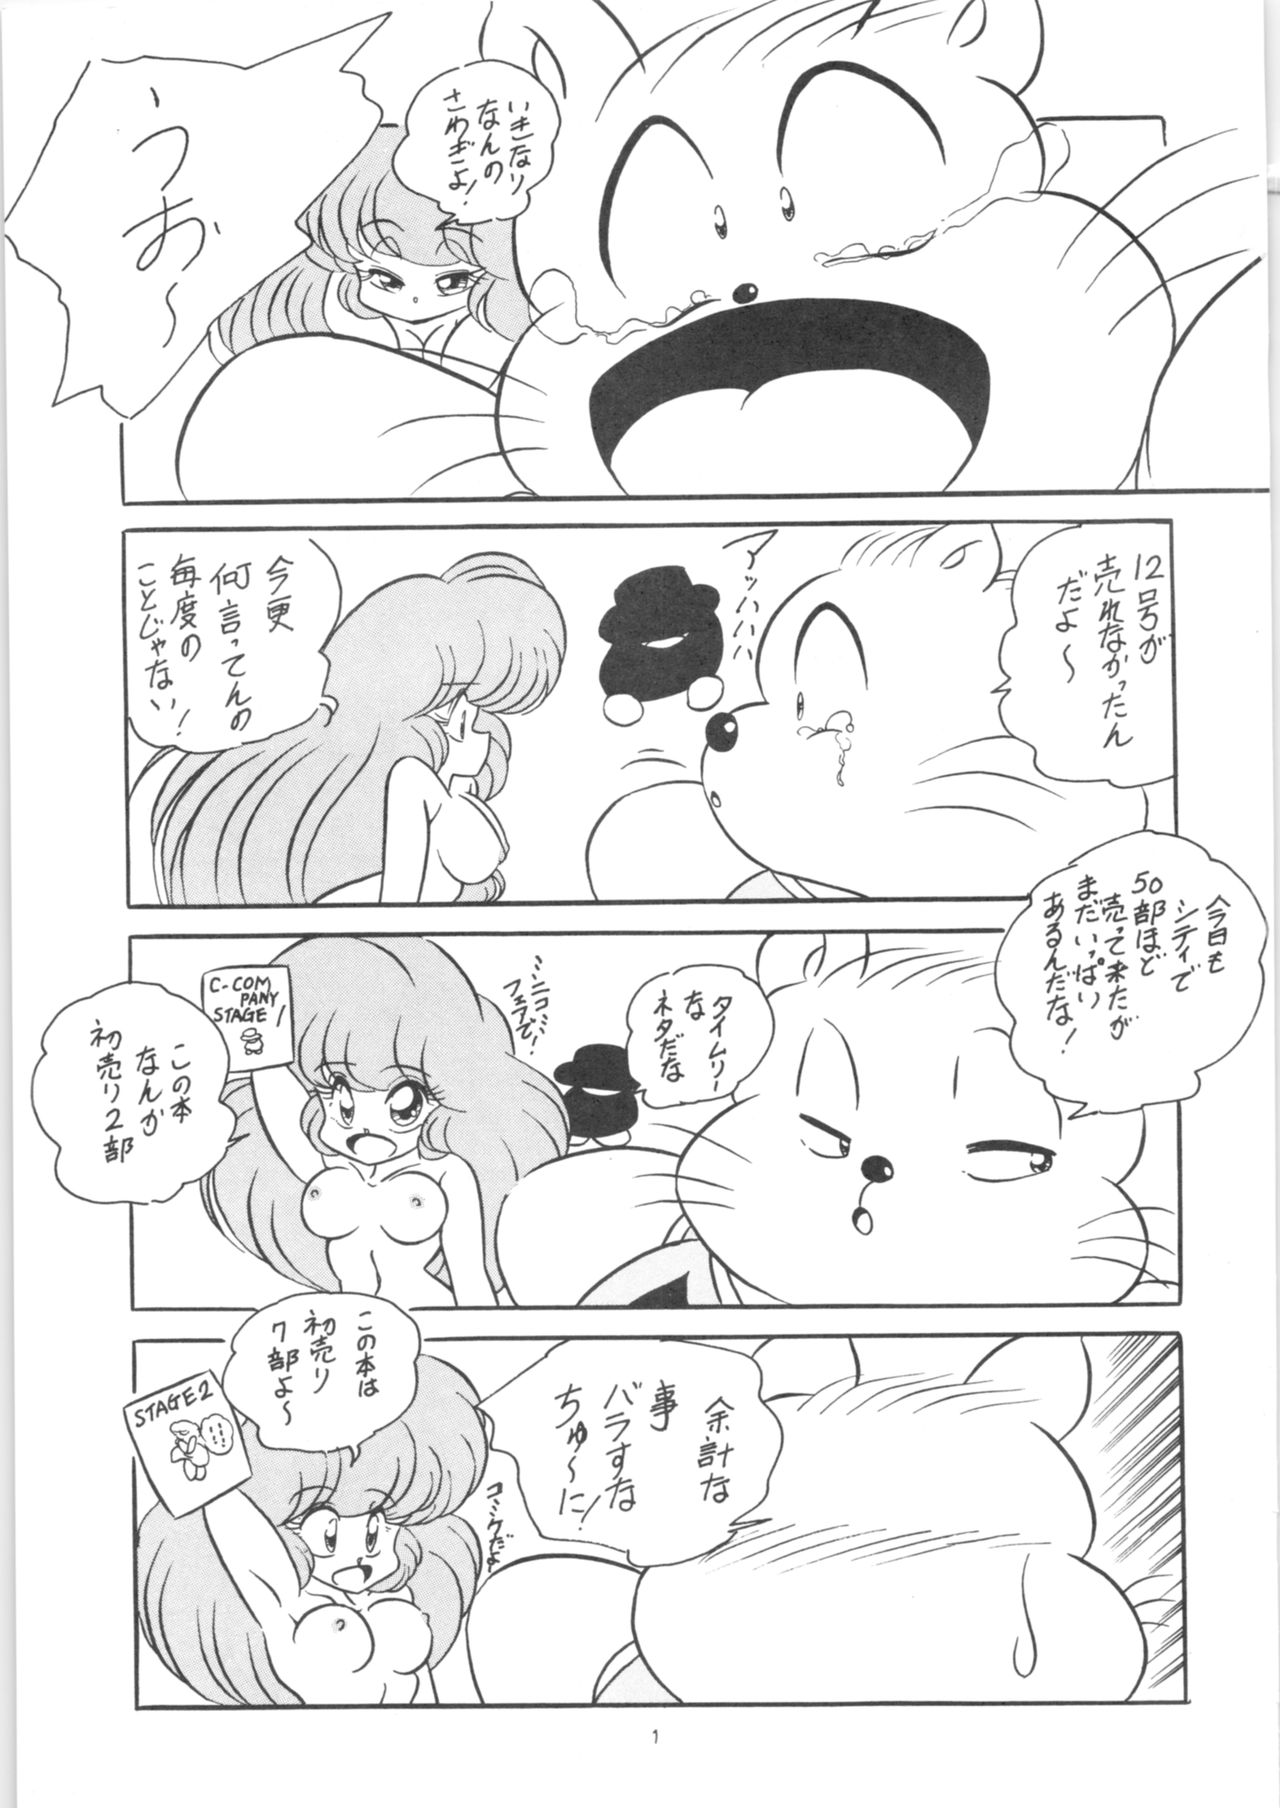 [C-COMPANY] C-COMPANY SPECIAL STAGE 13 (Ranma 1/2) page 2 full